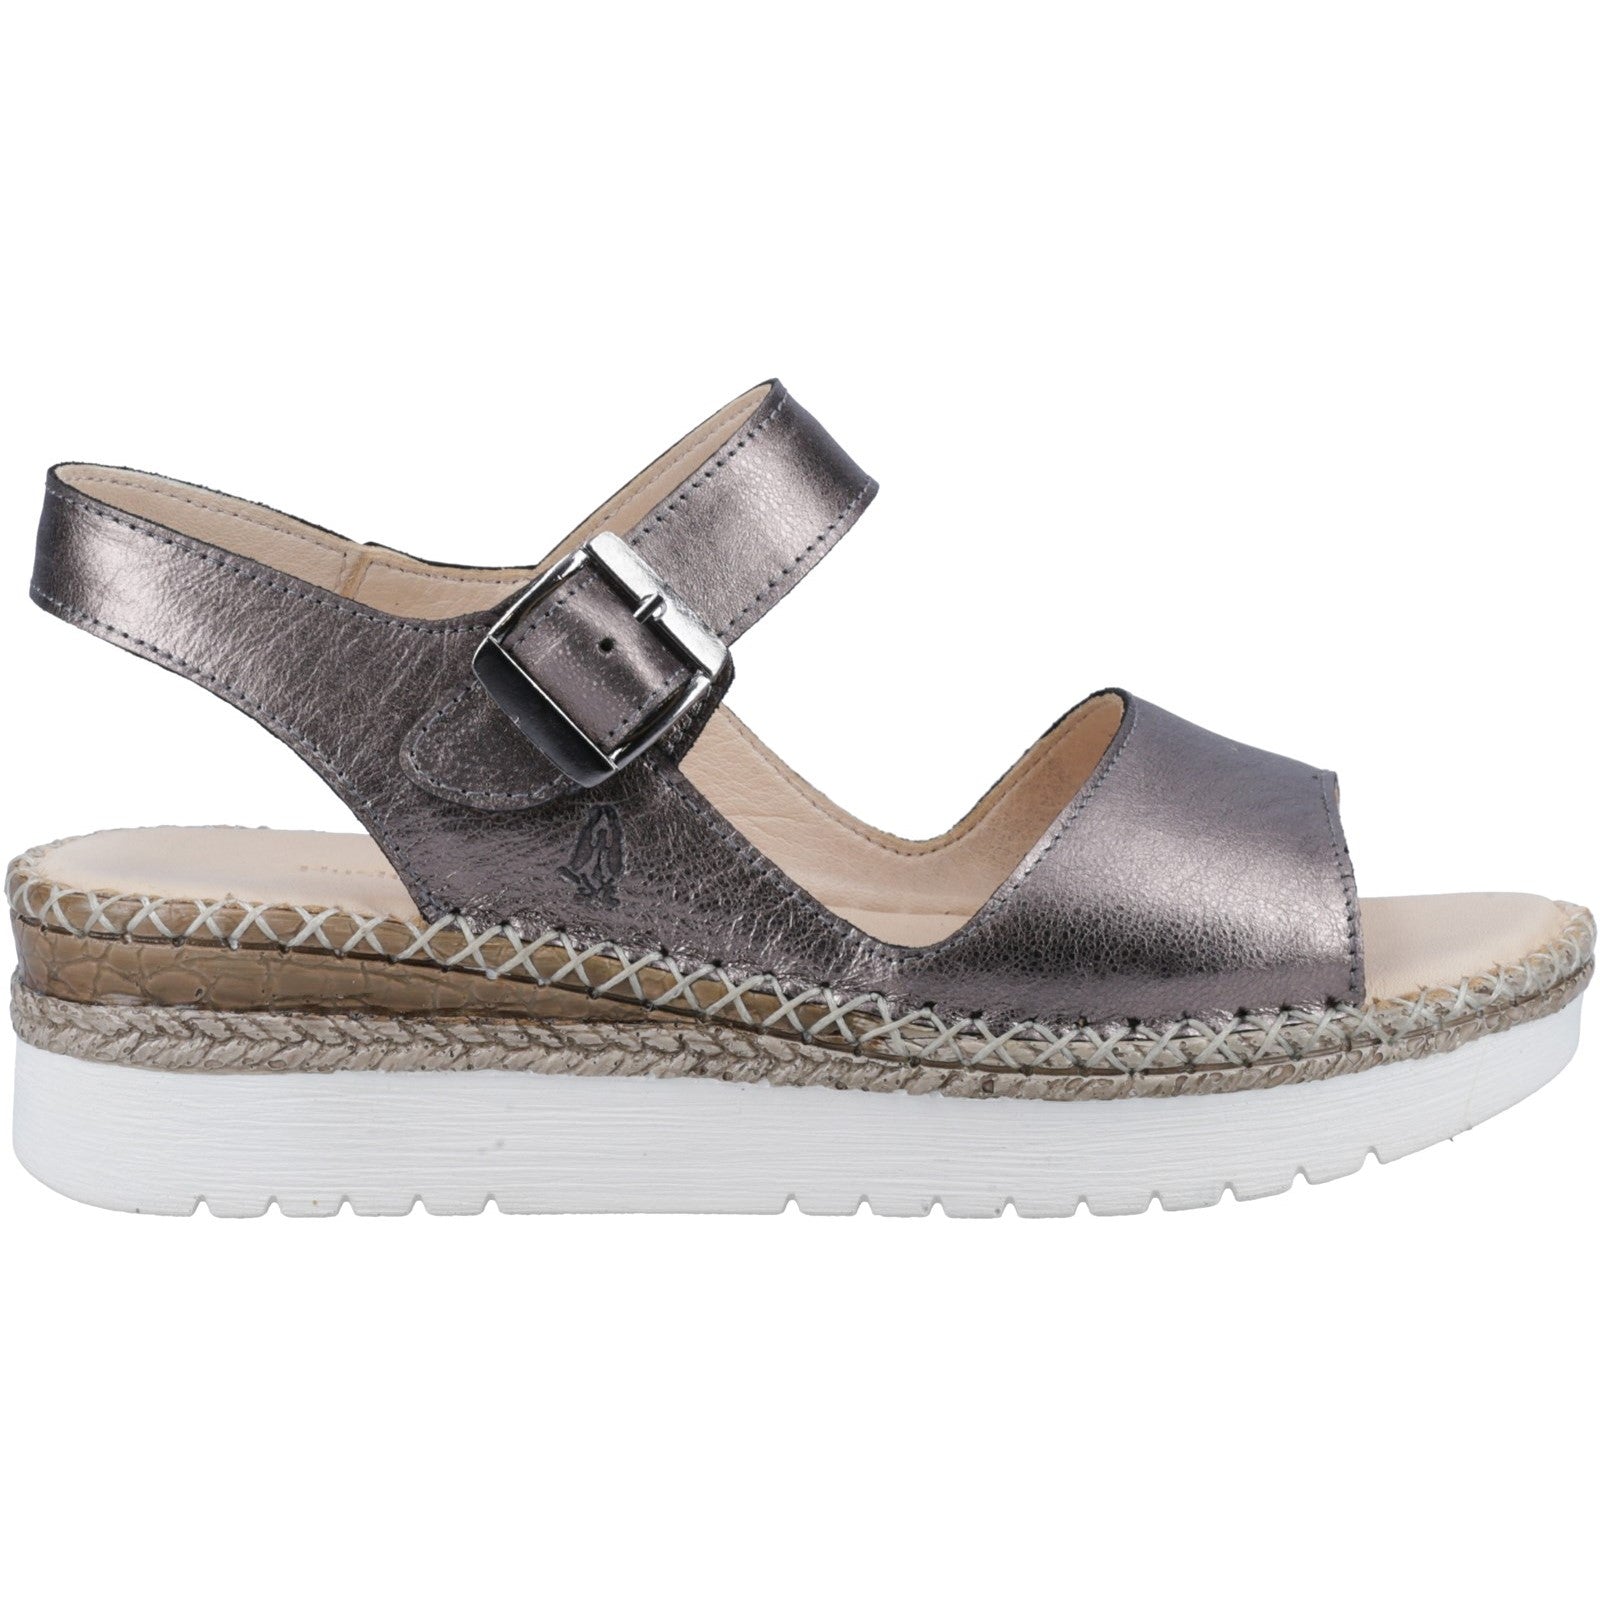 Hush Puppies Womens Stacey Leather Sandal - Silver